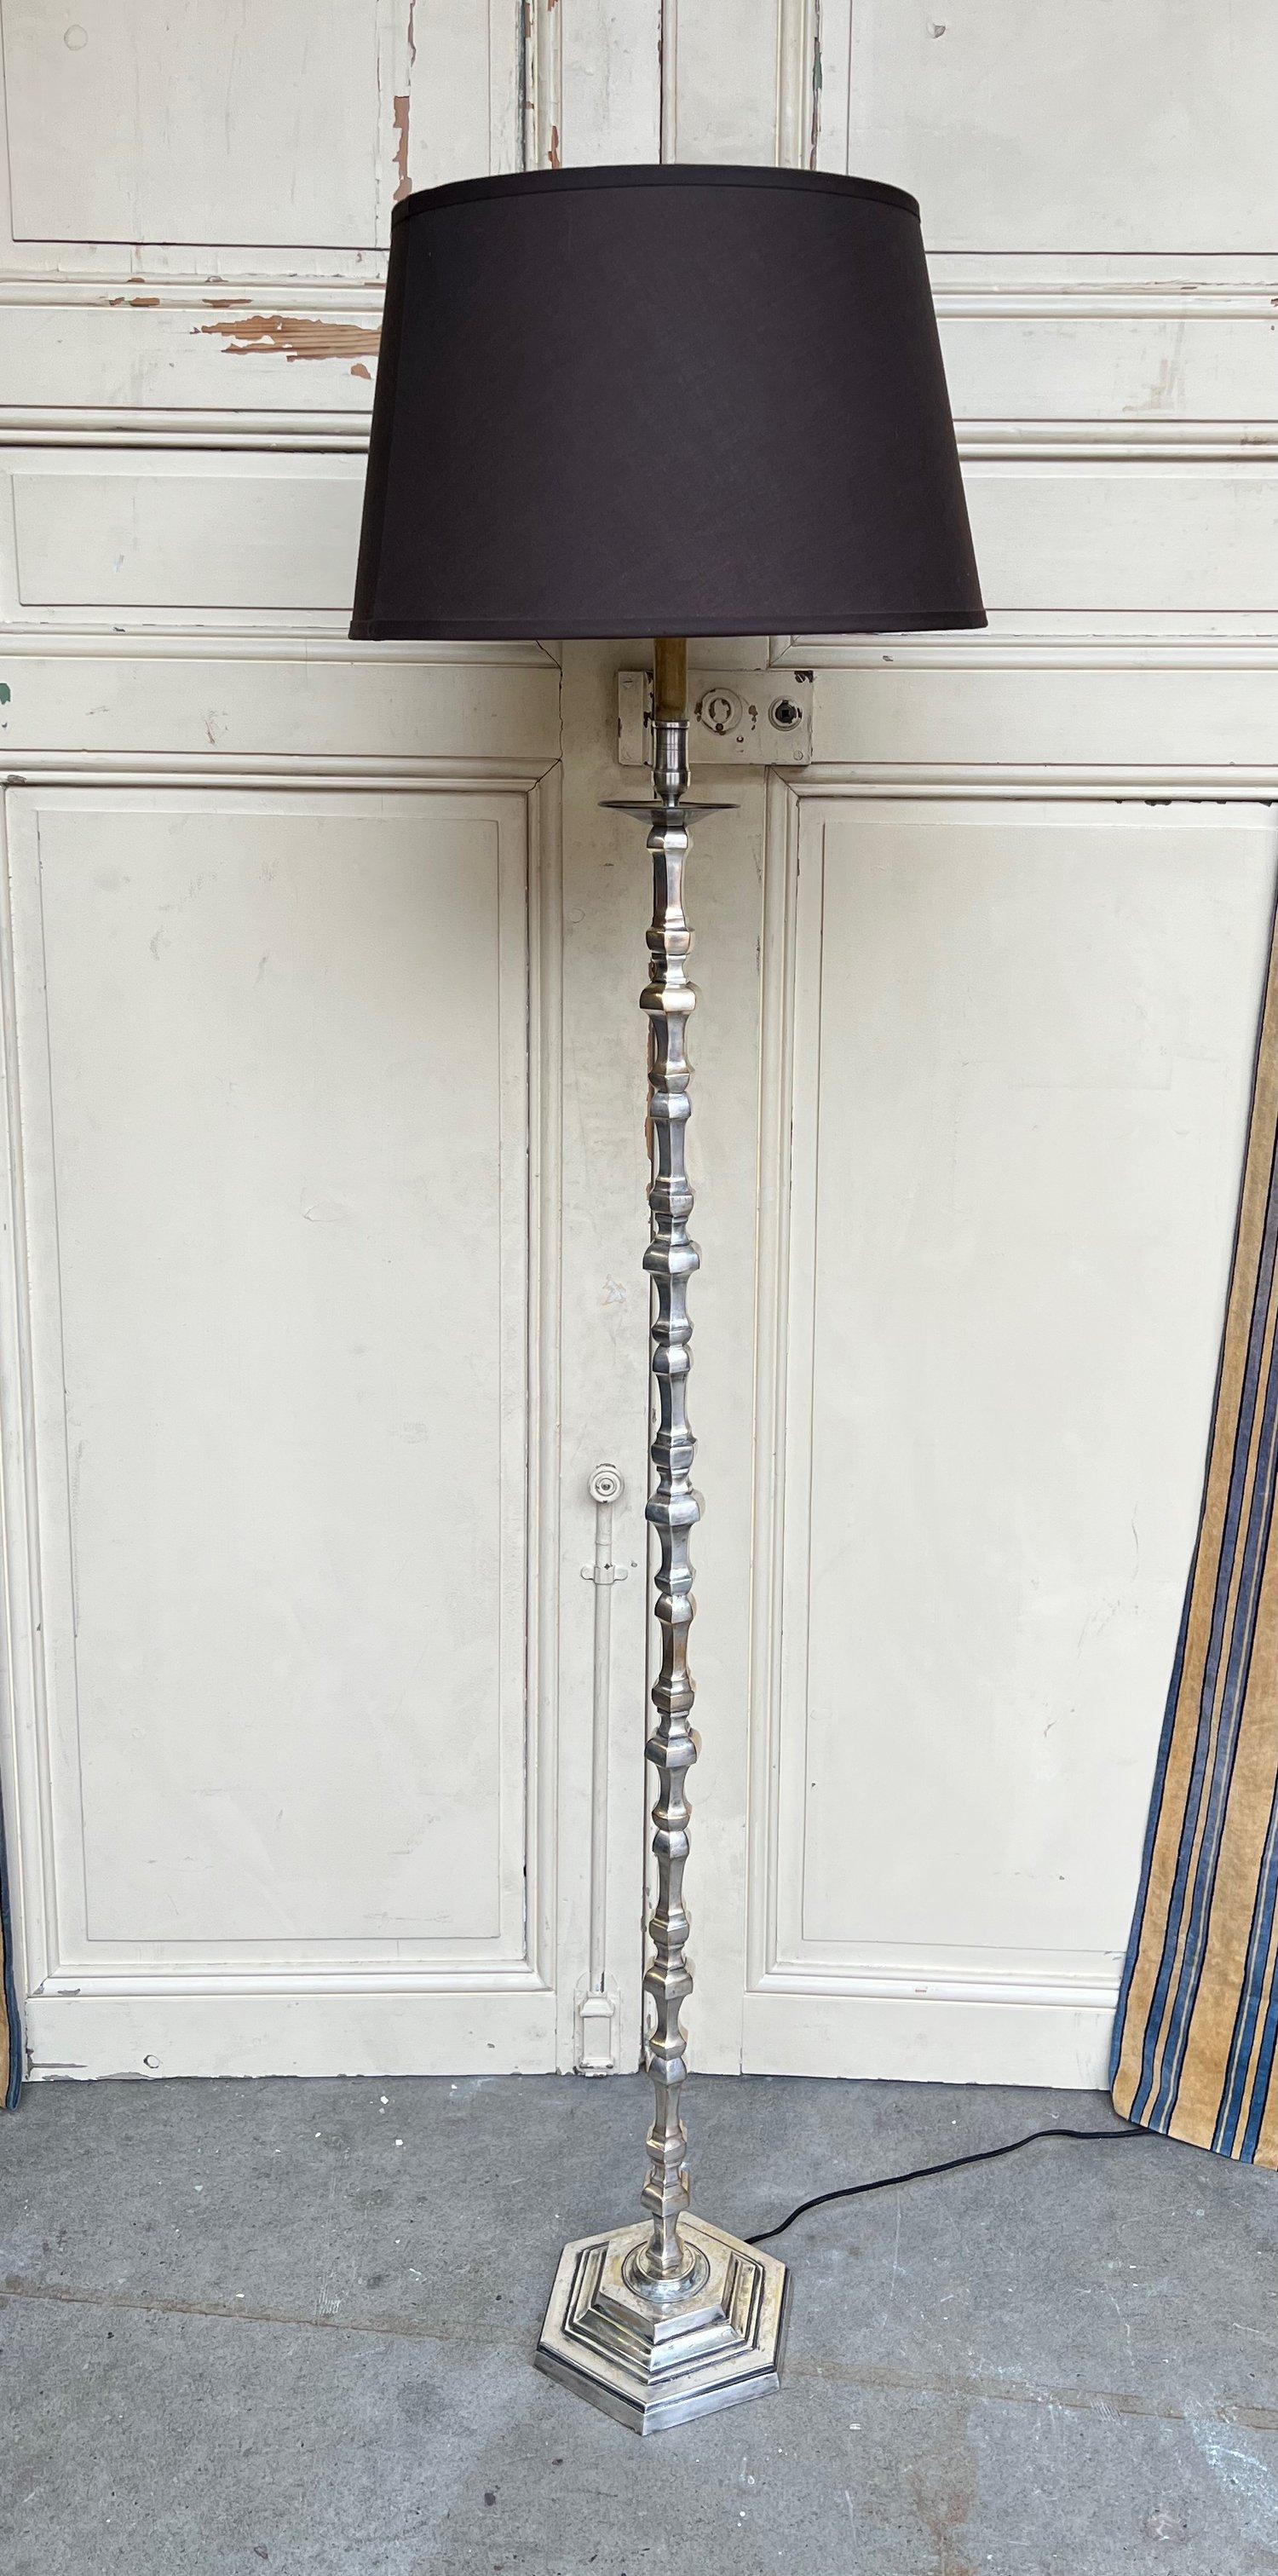 A handsome French floor lamp from the 1940s, made of silver plated brass and bronze. The lamp stands on a hexagonal base, supporting a captivating arrangement of turned pieces in various sizes. These elements create a visually engaging pattern that